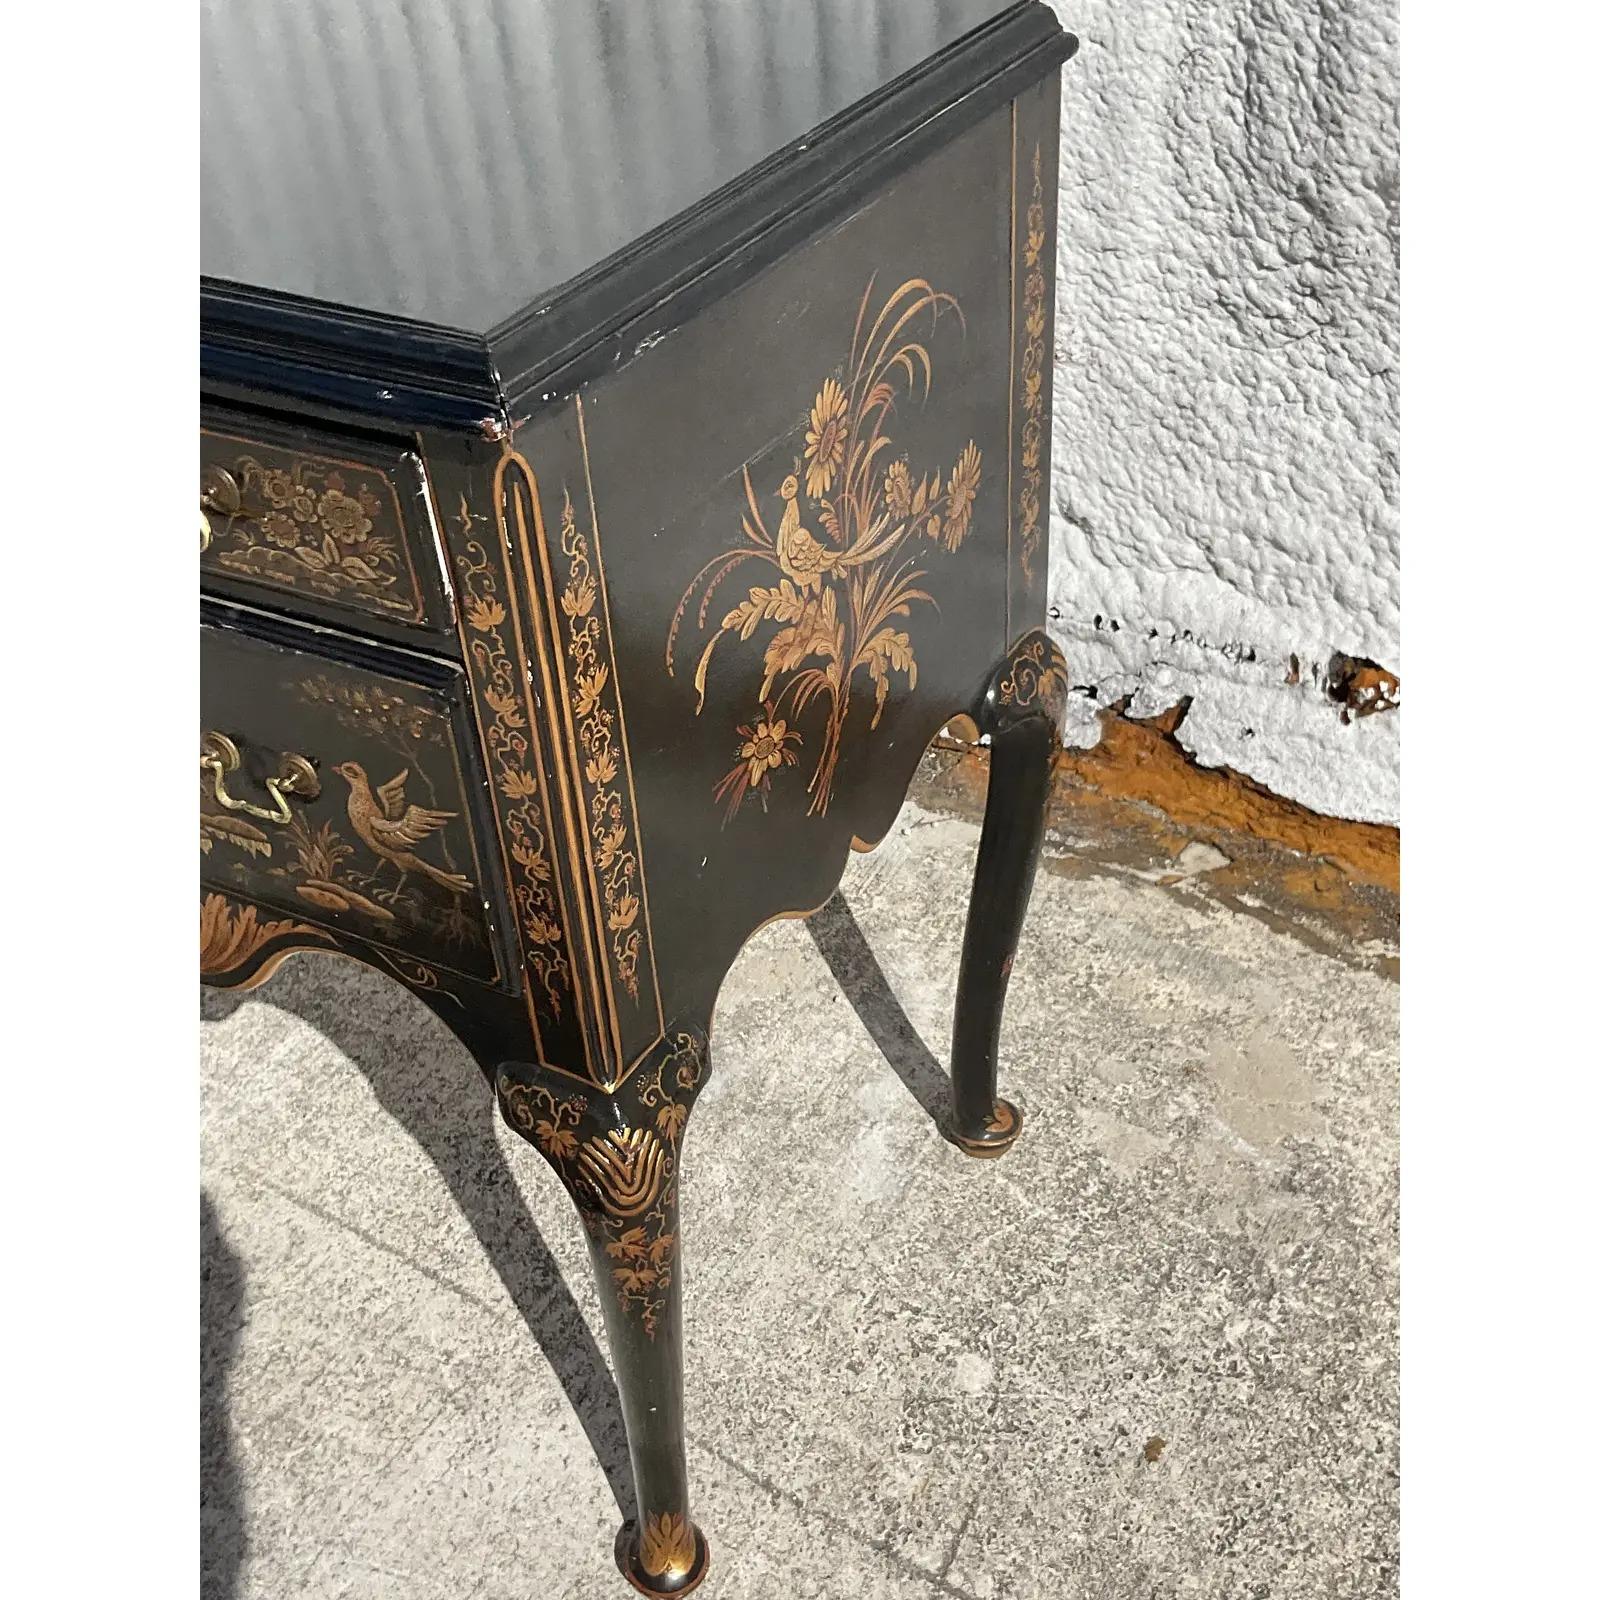 A fantastic vintage Asian Chinoiserie lowboy. Beautiful black lacquered finish with hand painted gilt classic pastoral scenes. Incredible attention to detail. Acquired from a Palm Beach estate.